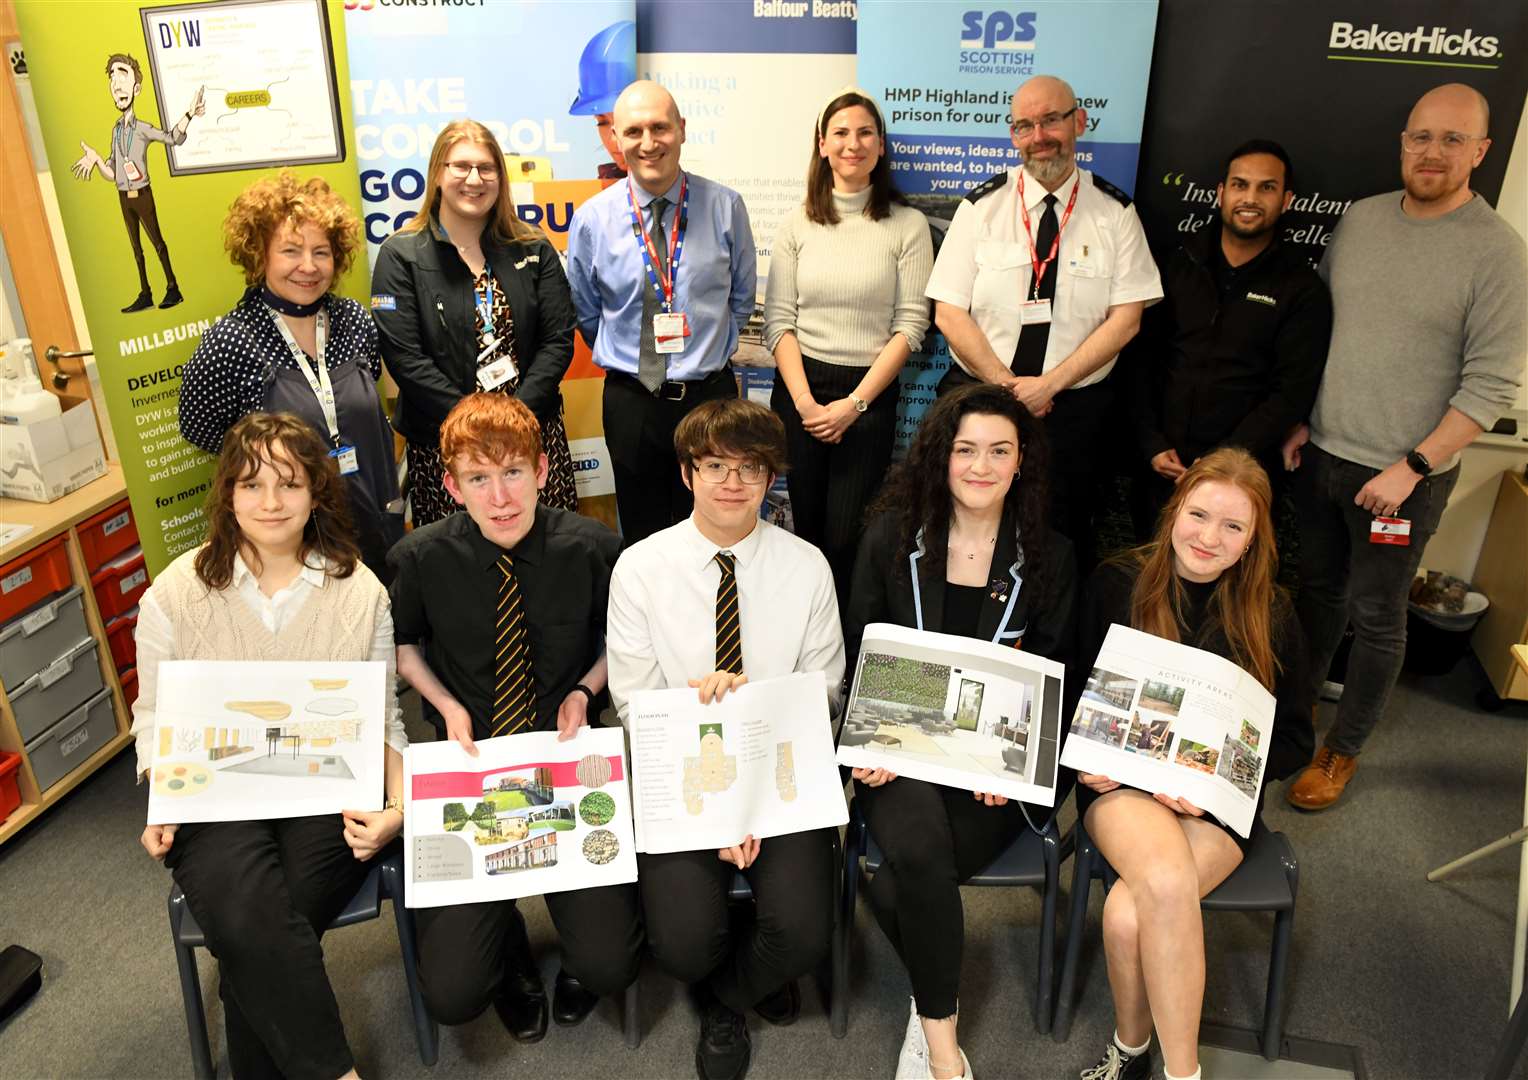 Pupils with their design work, accompanied by members of DYW, Balfour Beatty, the Scottish Prison Service and BakerHicks. Picture: James Mackenzie